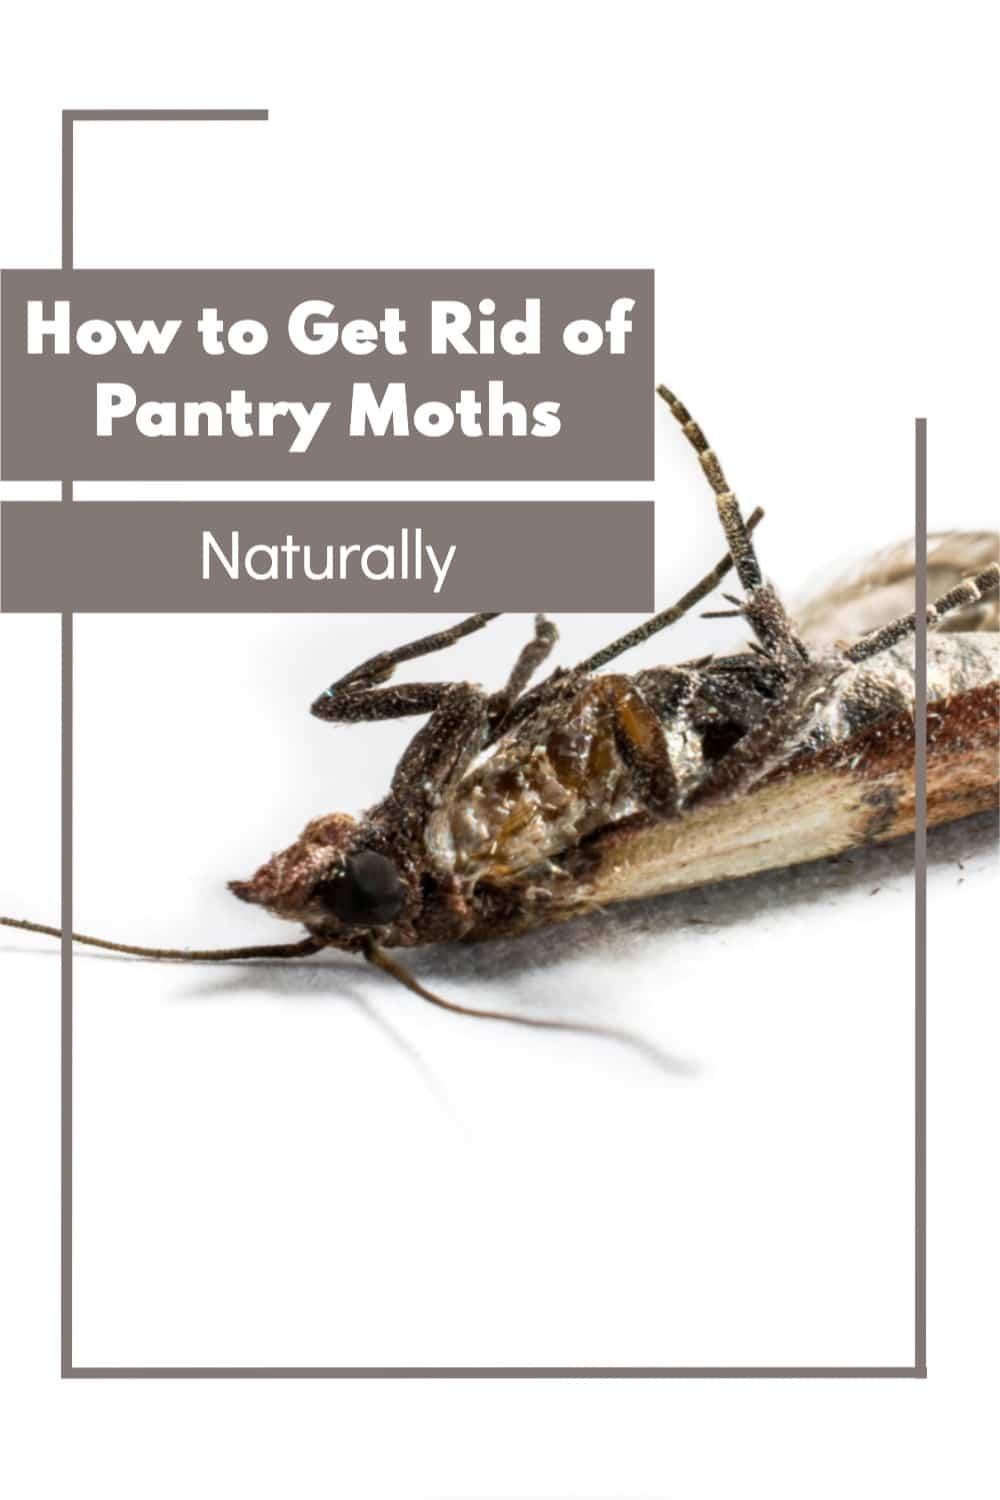 How to Get Rid of Pantry Moth Infestations Naturally - Garden